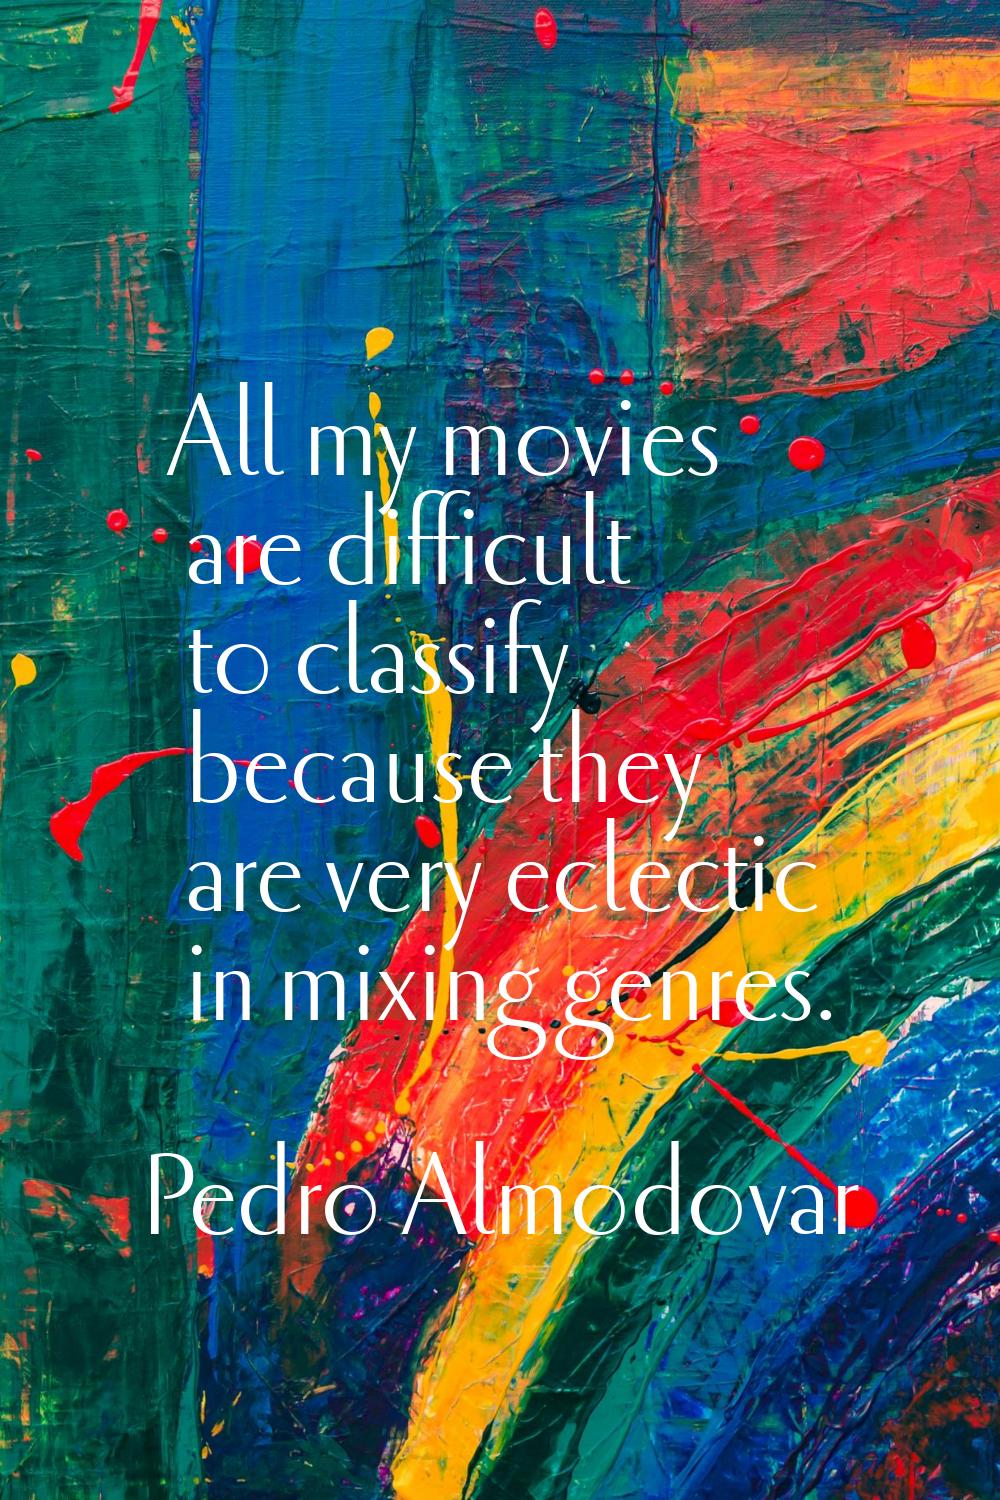 All my movies are difficult to classify because they are very eclectic in mixing genres.